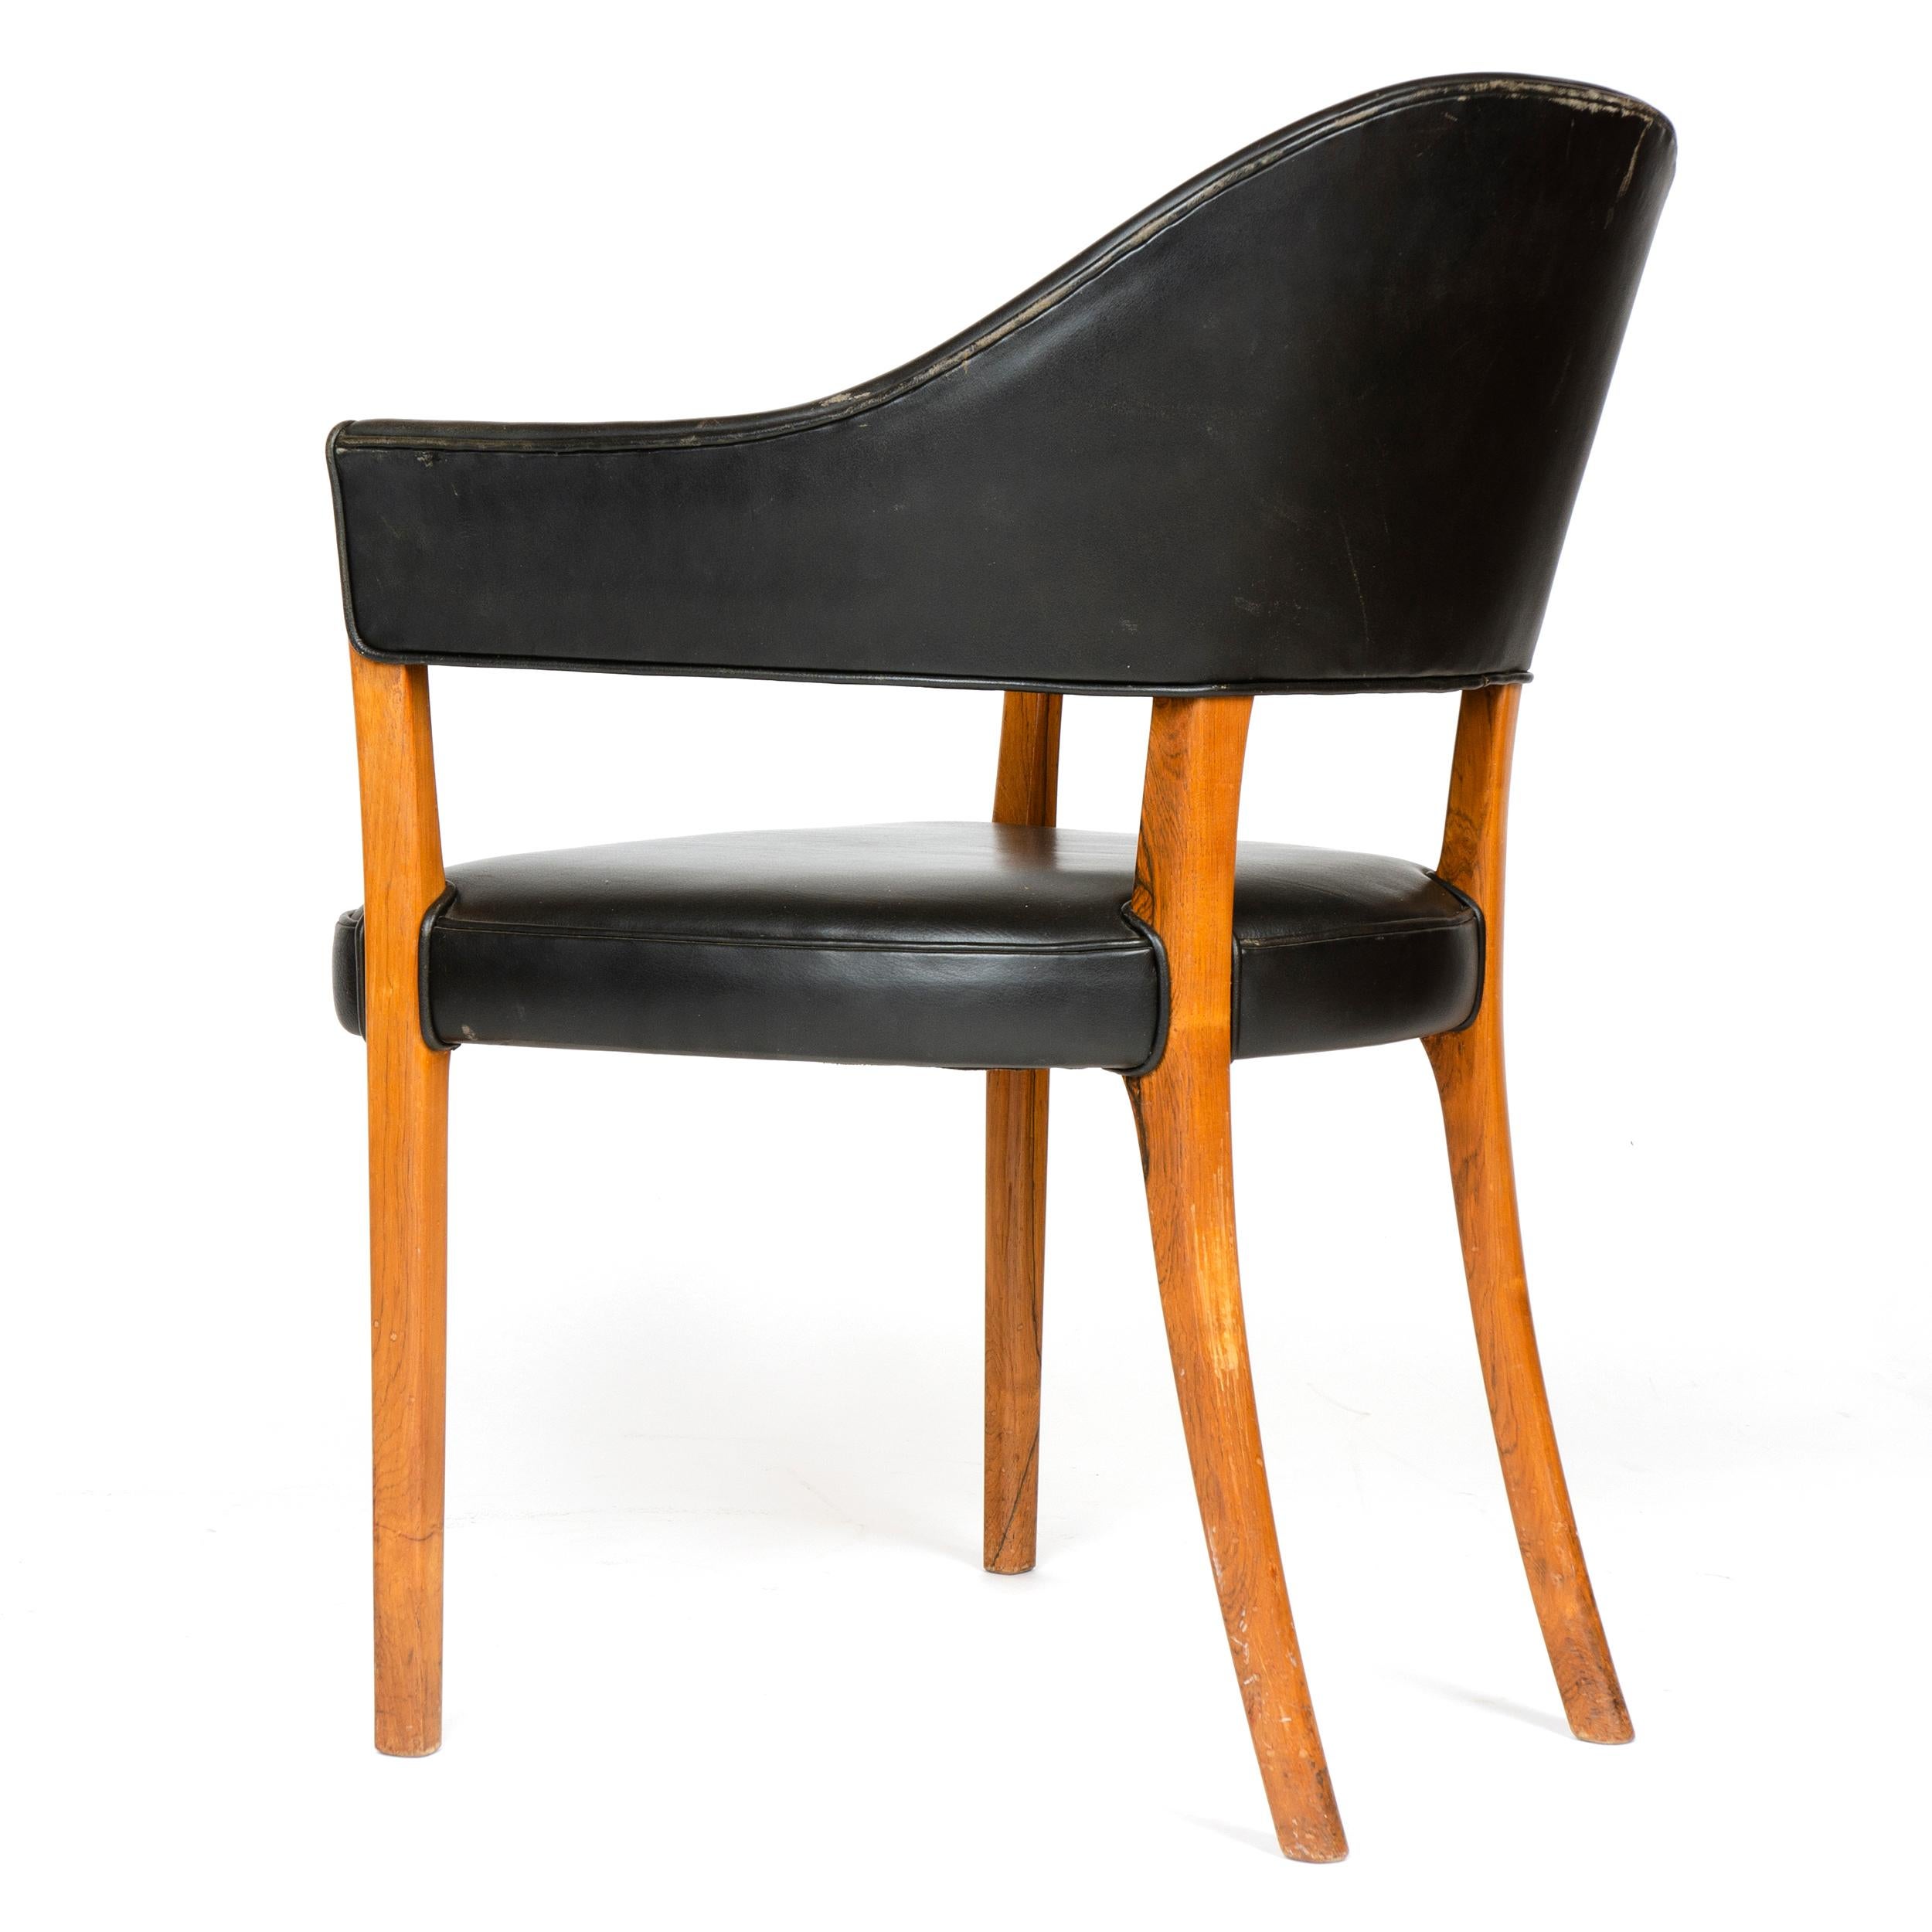 1950s Danish Rosewood Humpback Armchair by Ole Wanscher for A. J. Iversen In Good Condition For Sale In Sagaponack, NY